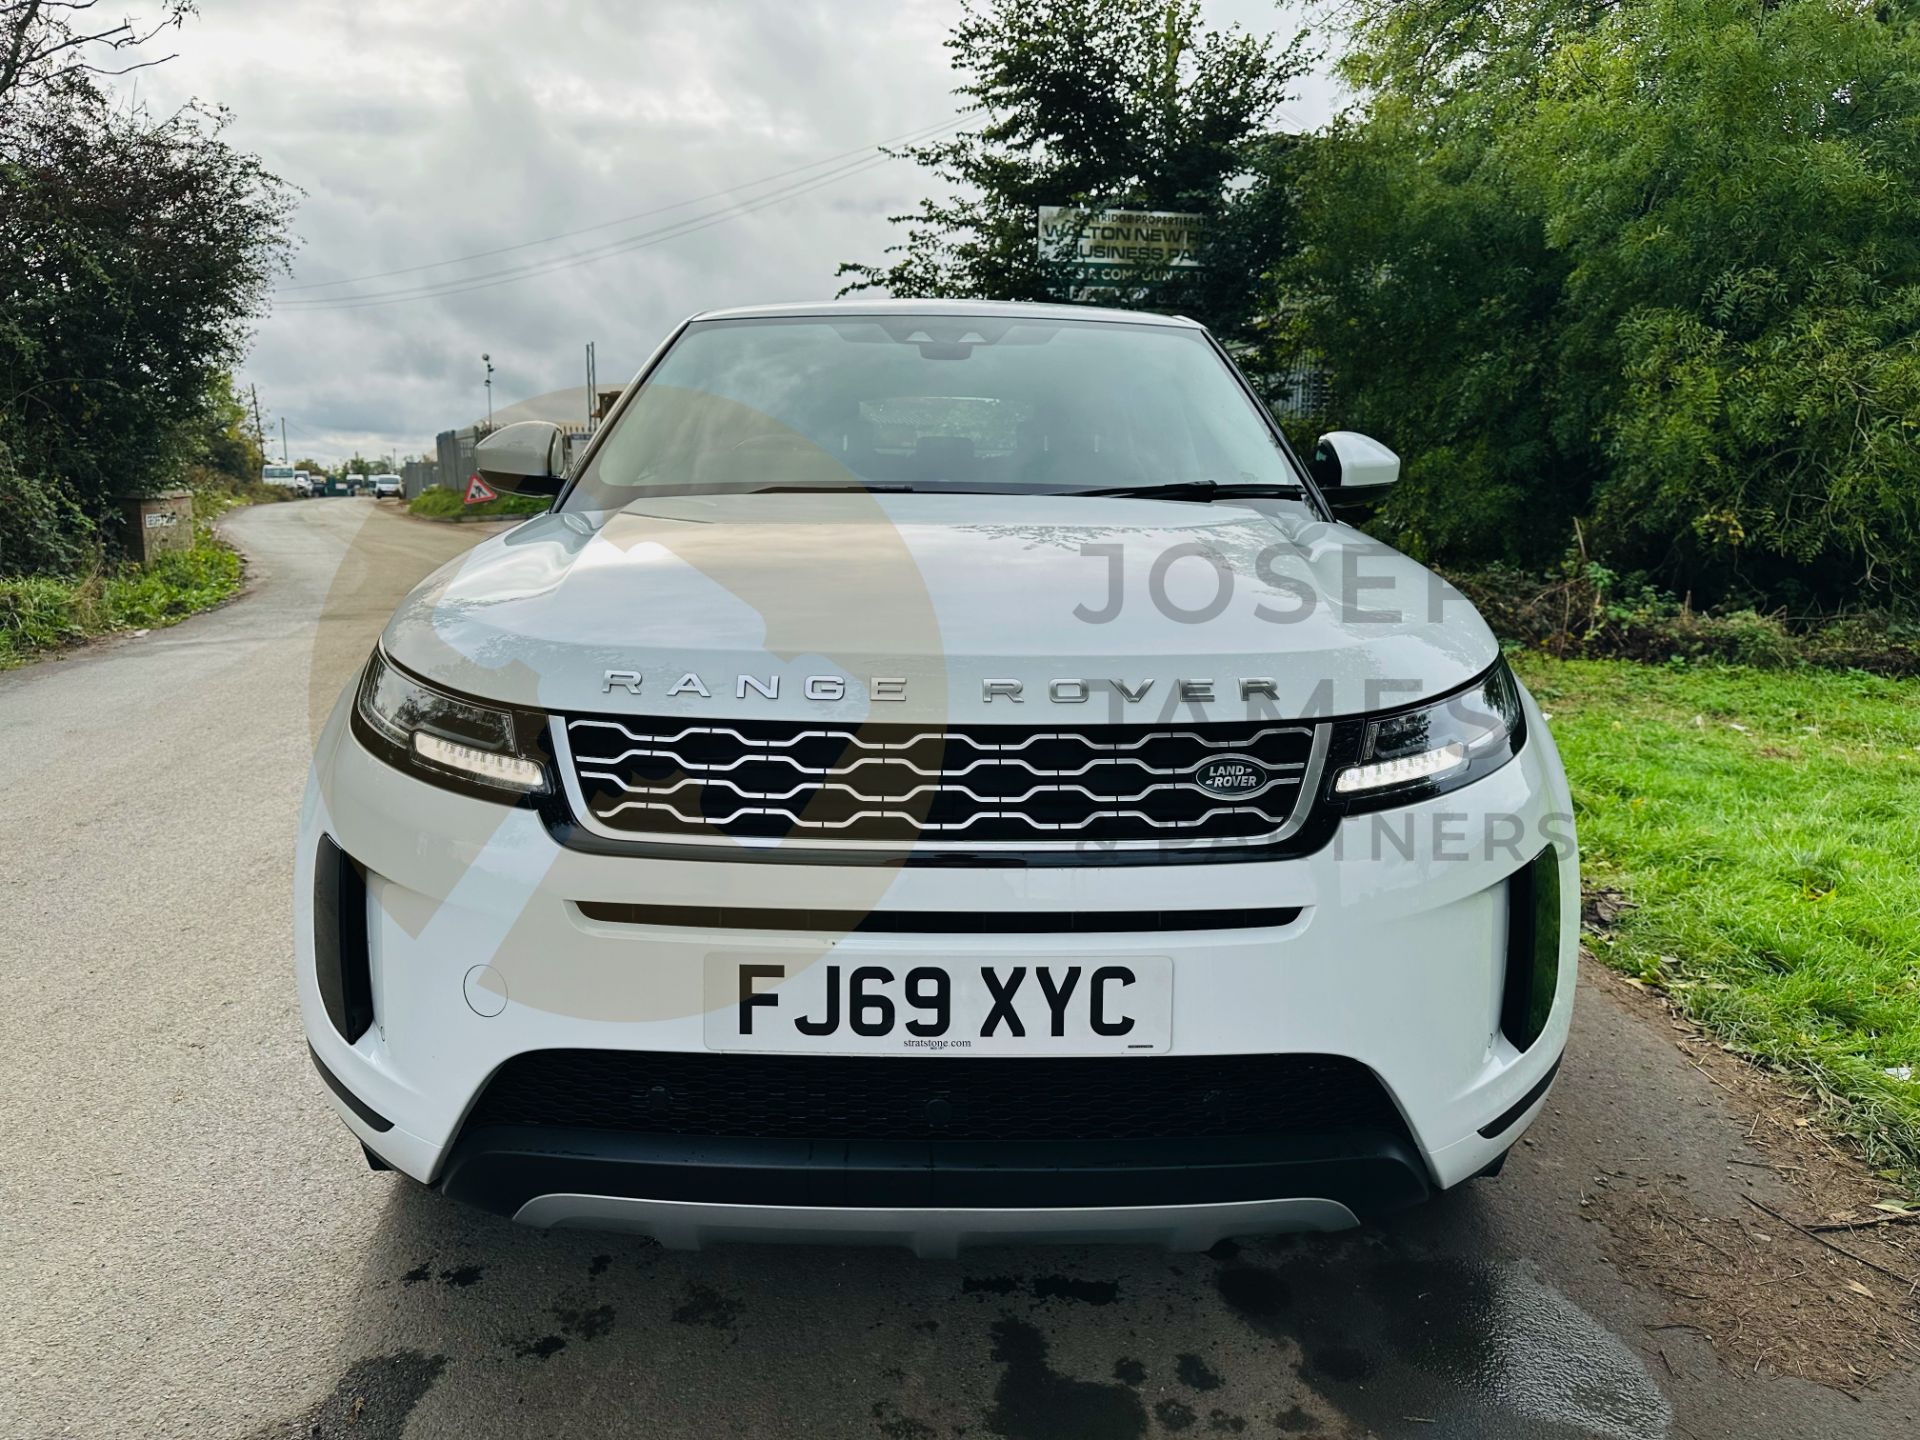 (ON SALE) LAND ROVER RANGE ROVER EVOQUE 2.0d AUTO-START STOP (2020 MODEL) ONLY 33K MILES FROM NEW - Image 4 of 41